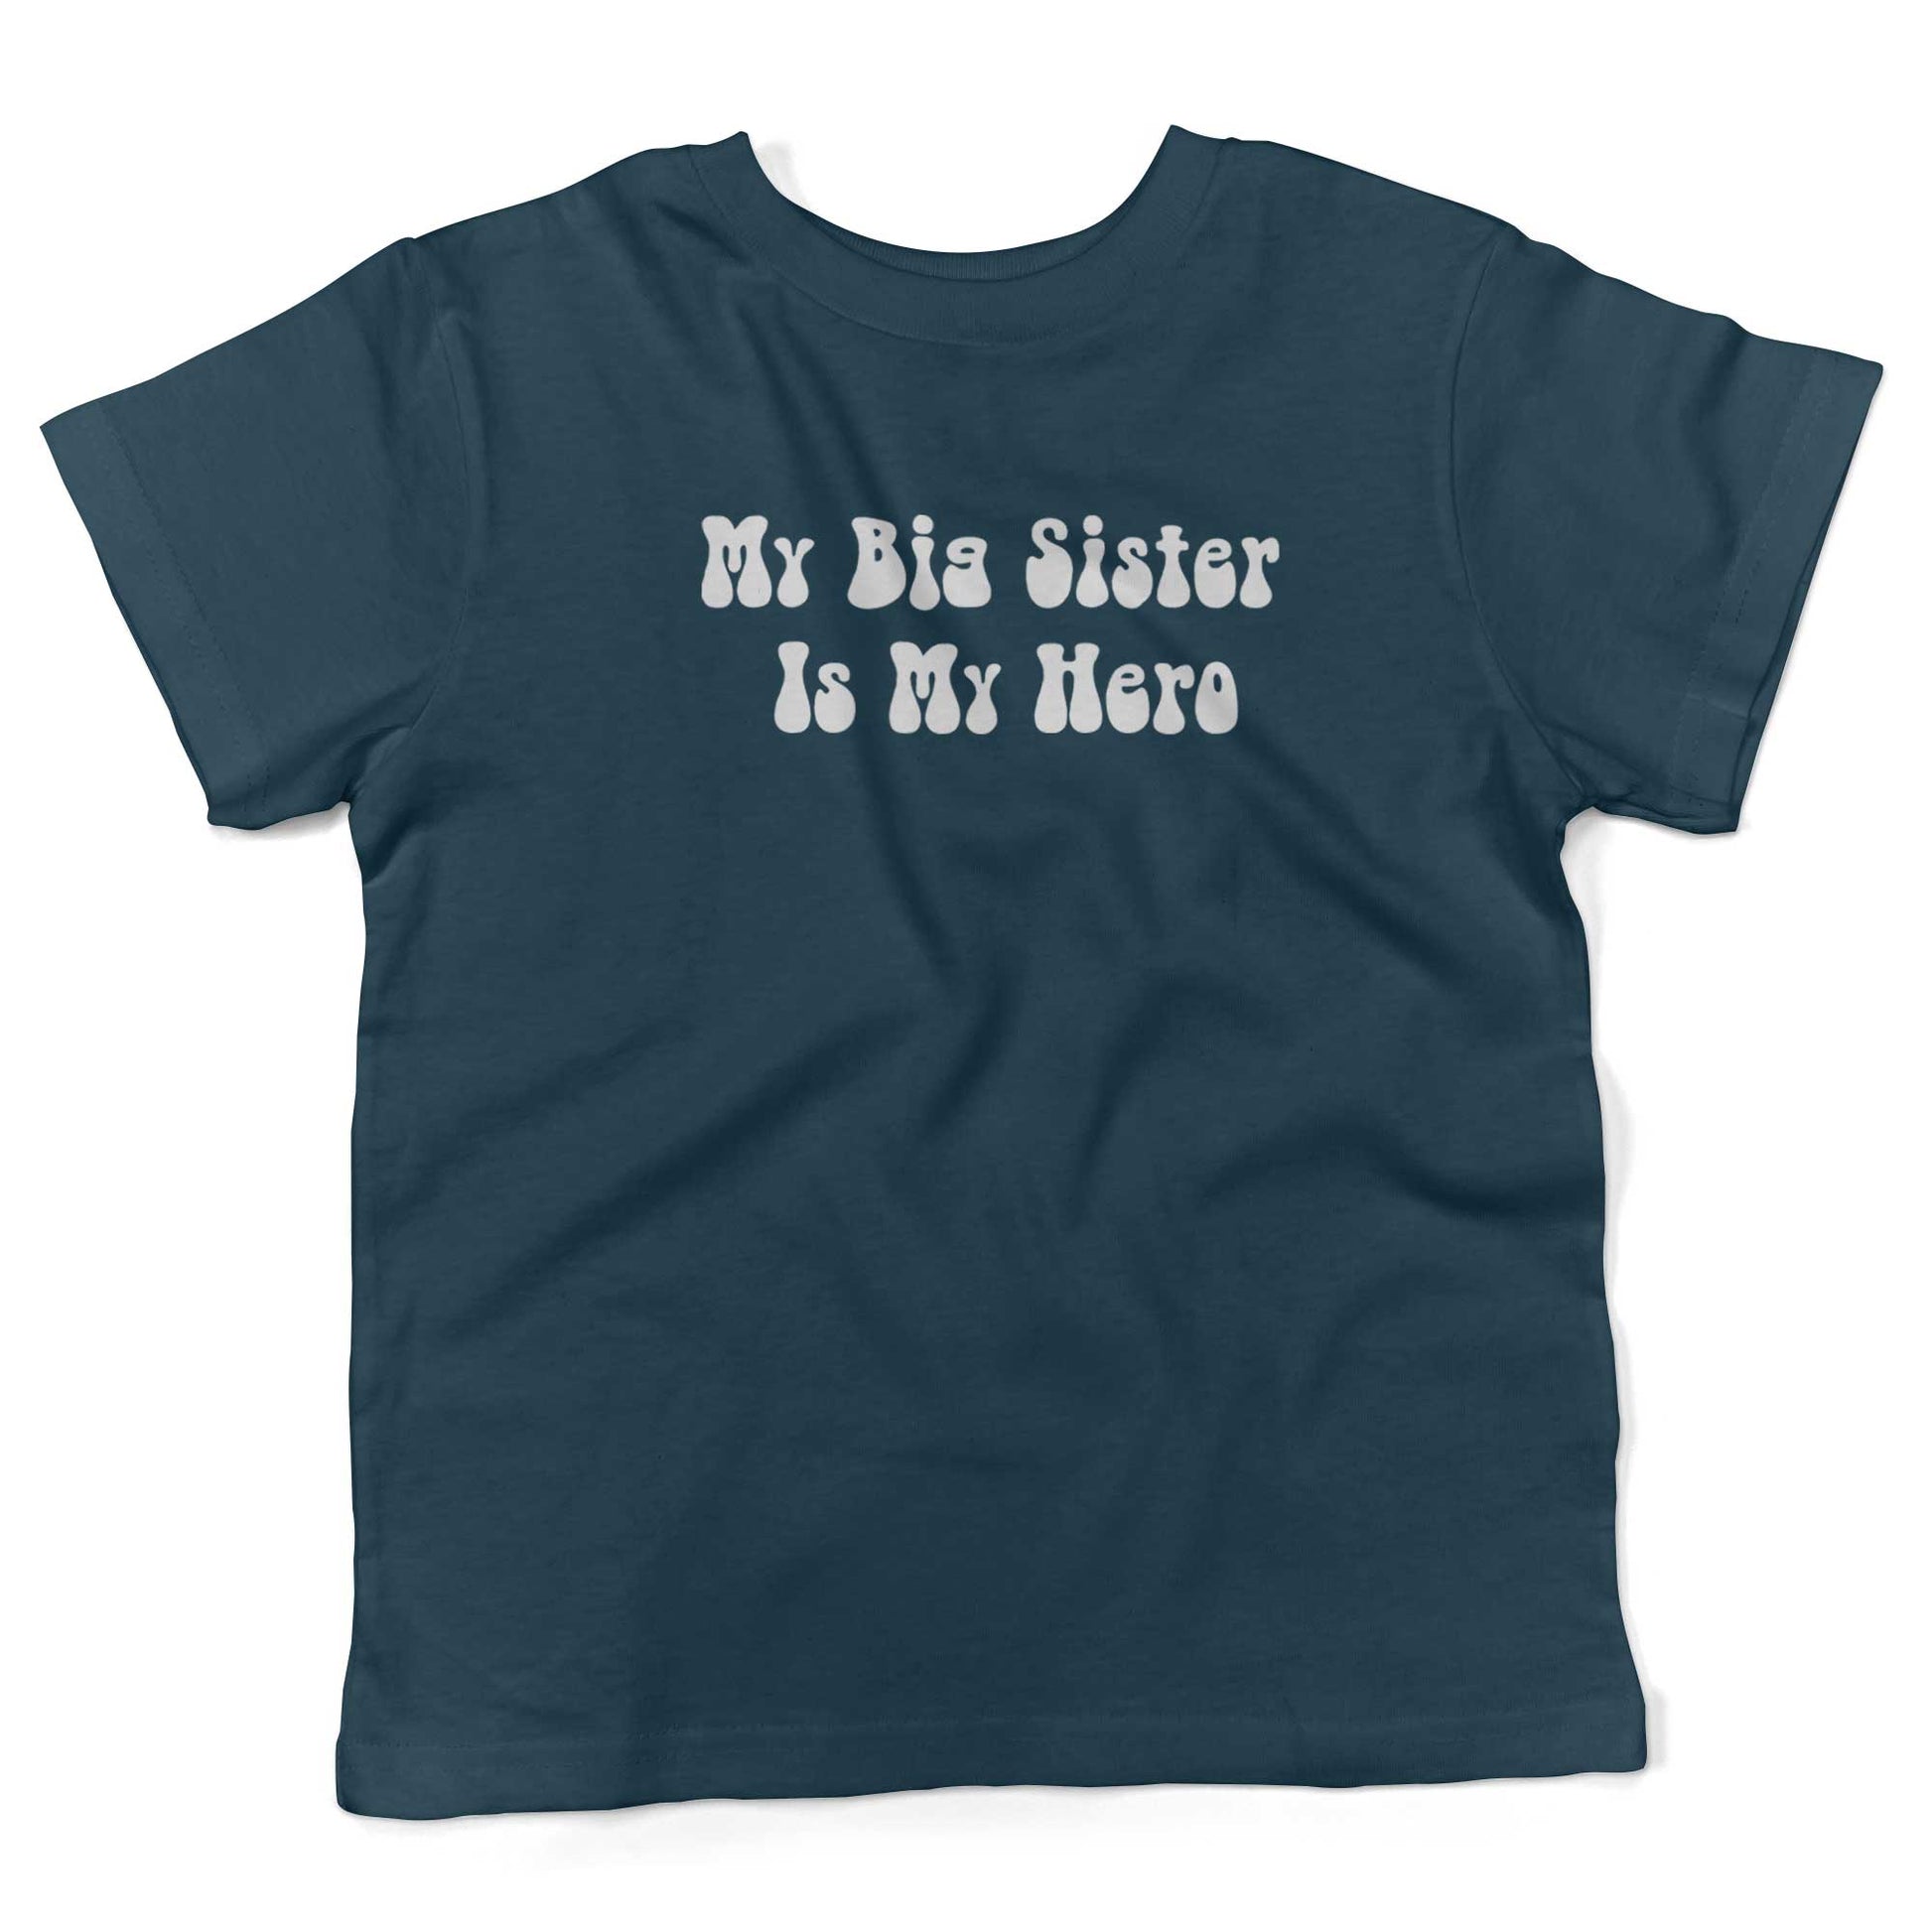 My Big Sister Is My Hero Toddler Shirt-Organic Pacific Blue-2T